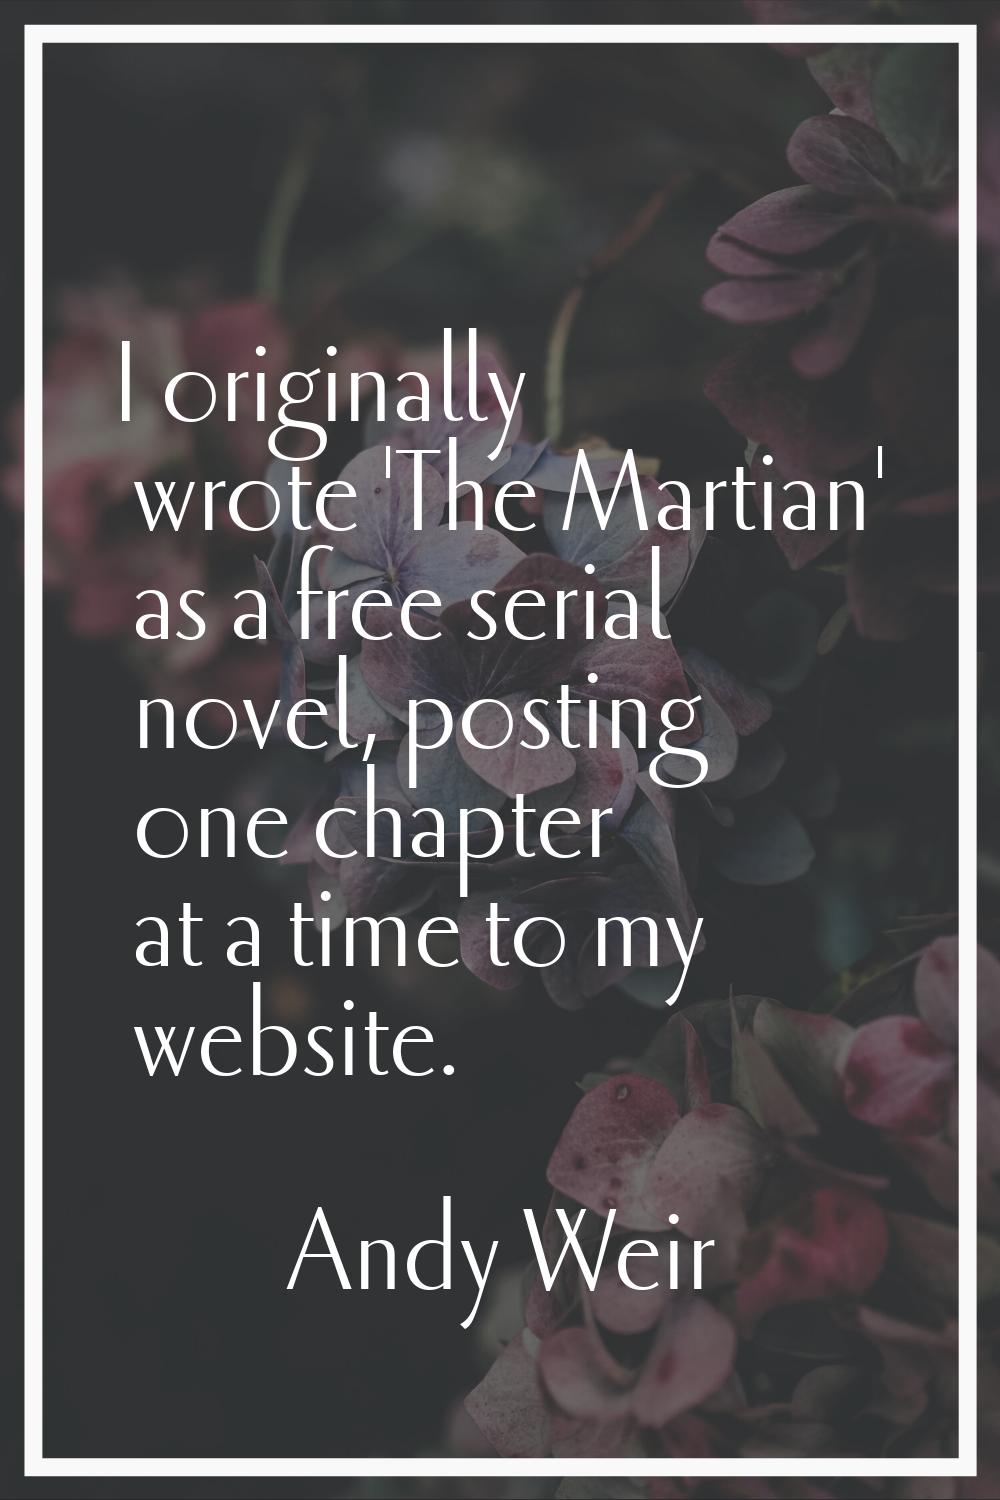 I originally wrote 'The Martian' as a free serial novel, posting one chapter at a time to my websit